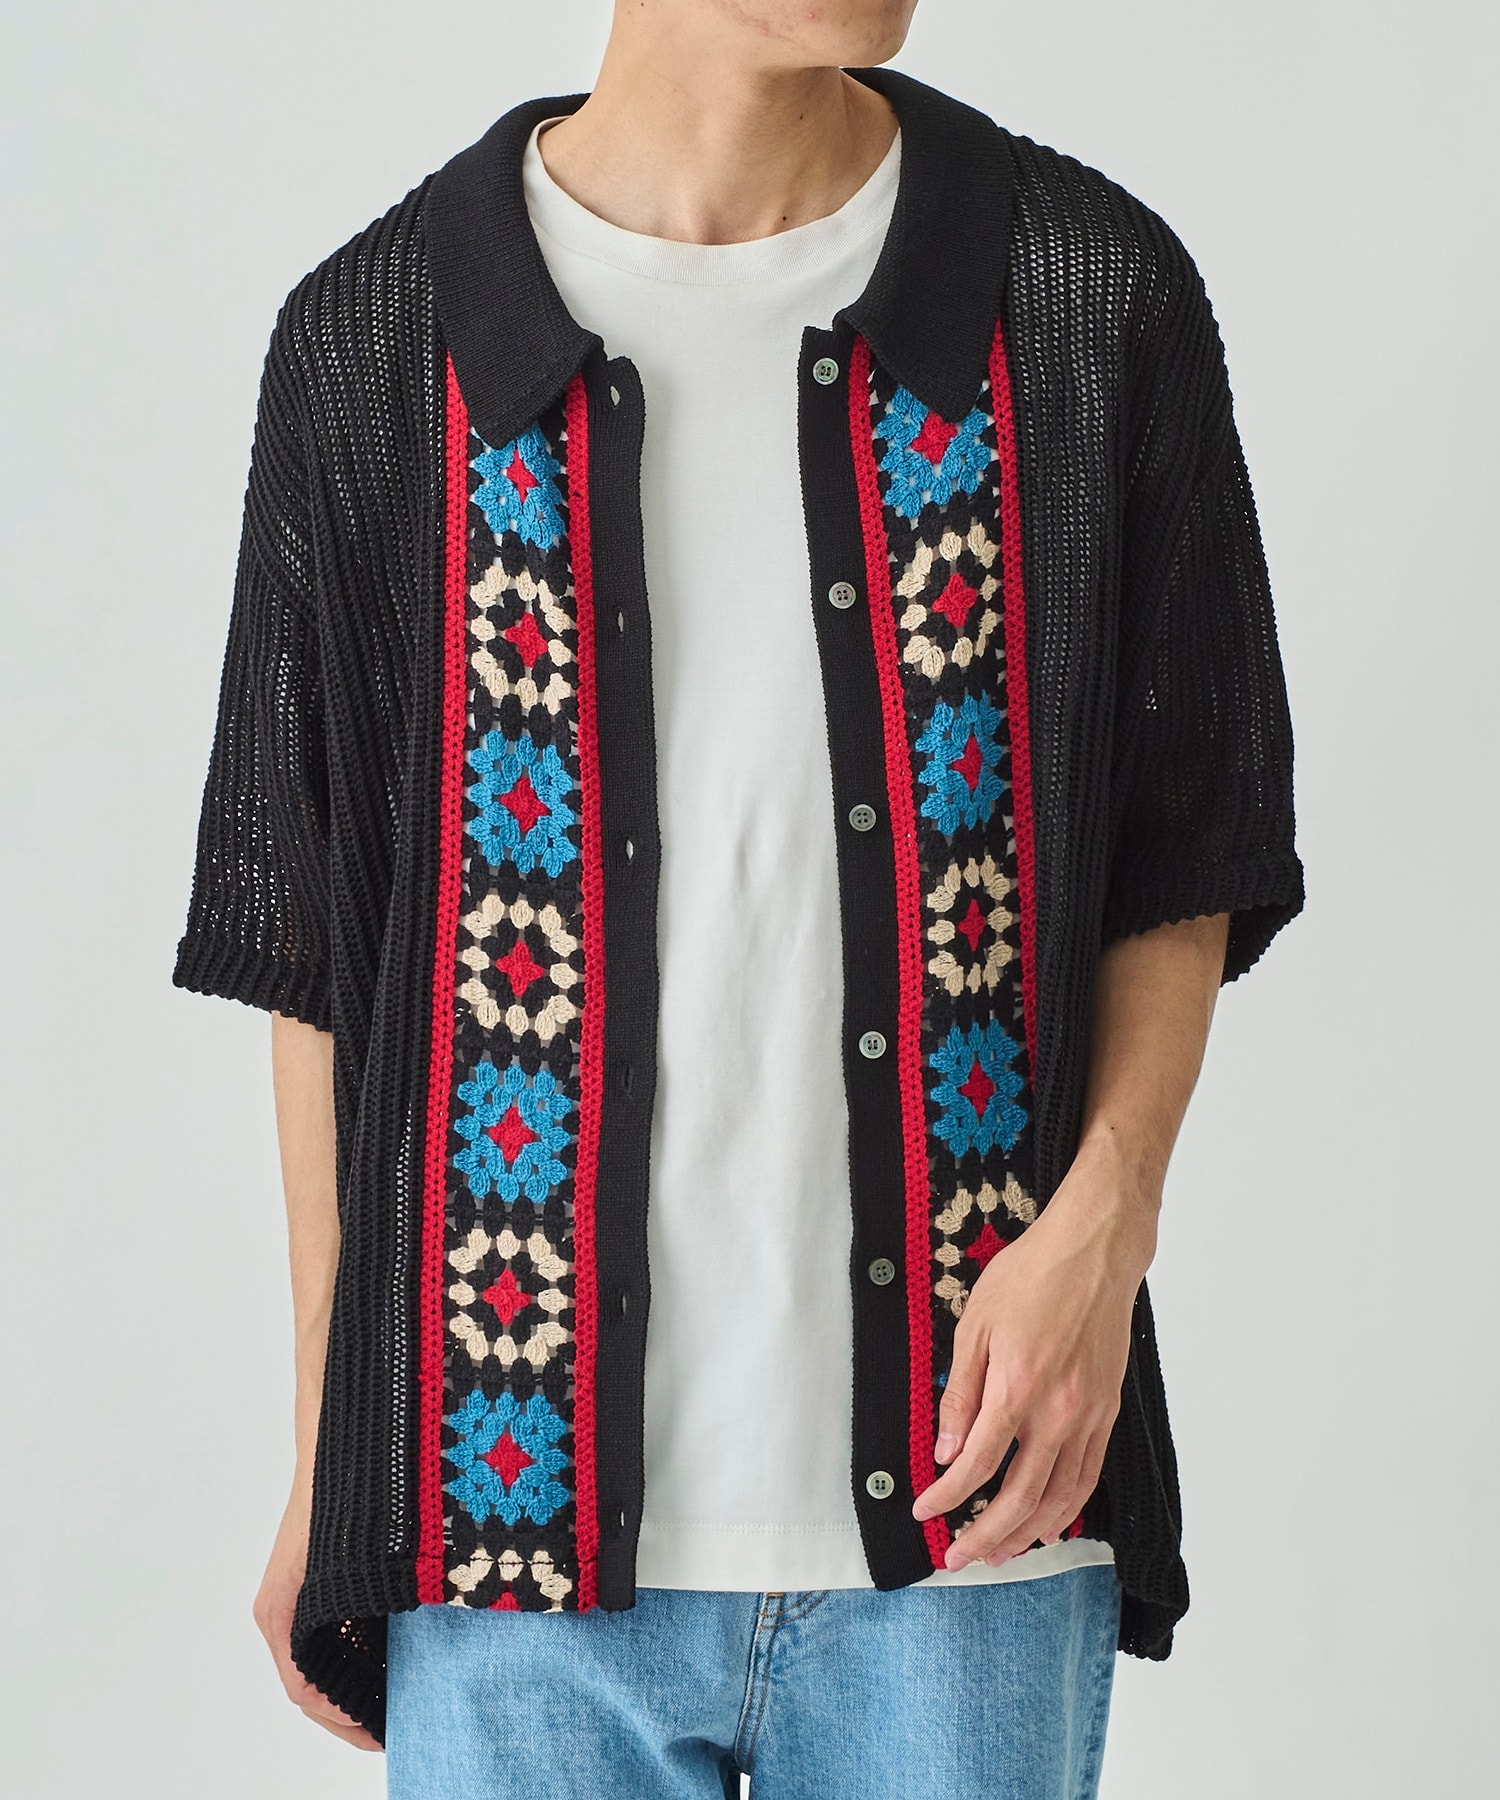 CROCHET LINE KNIT SHIRTS DISCOVERED